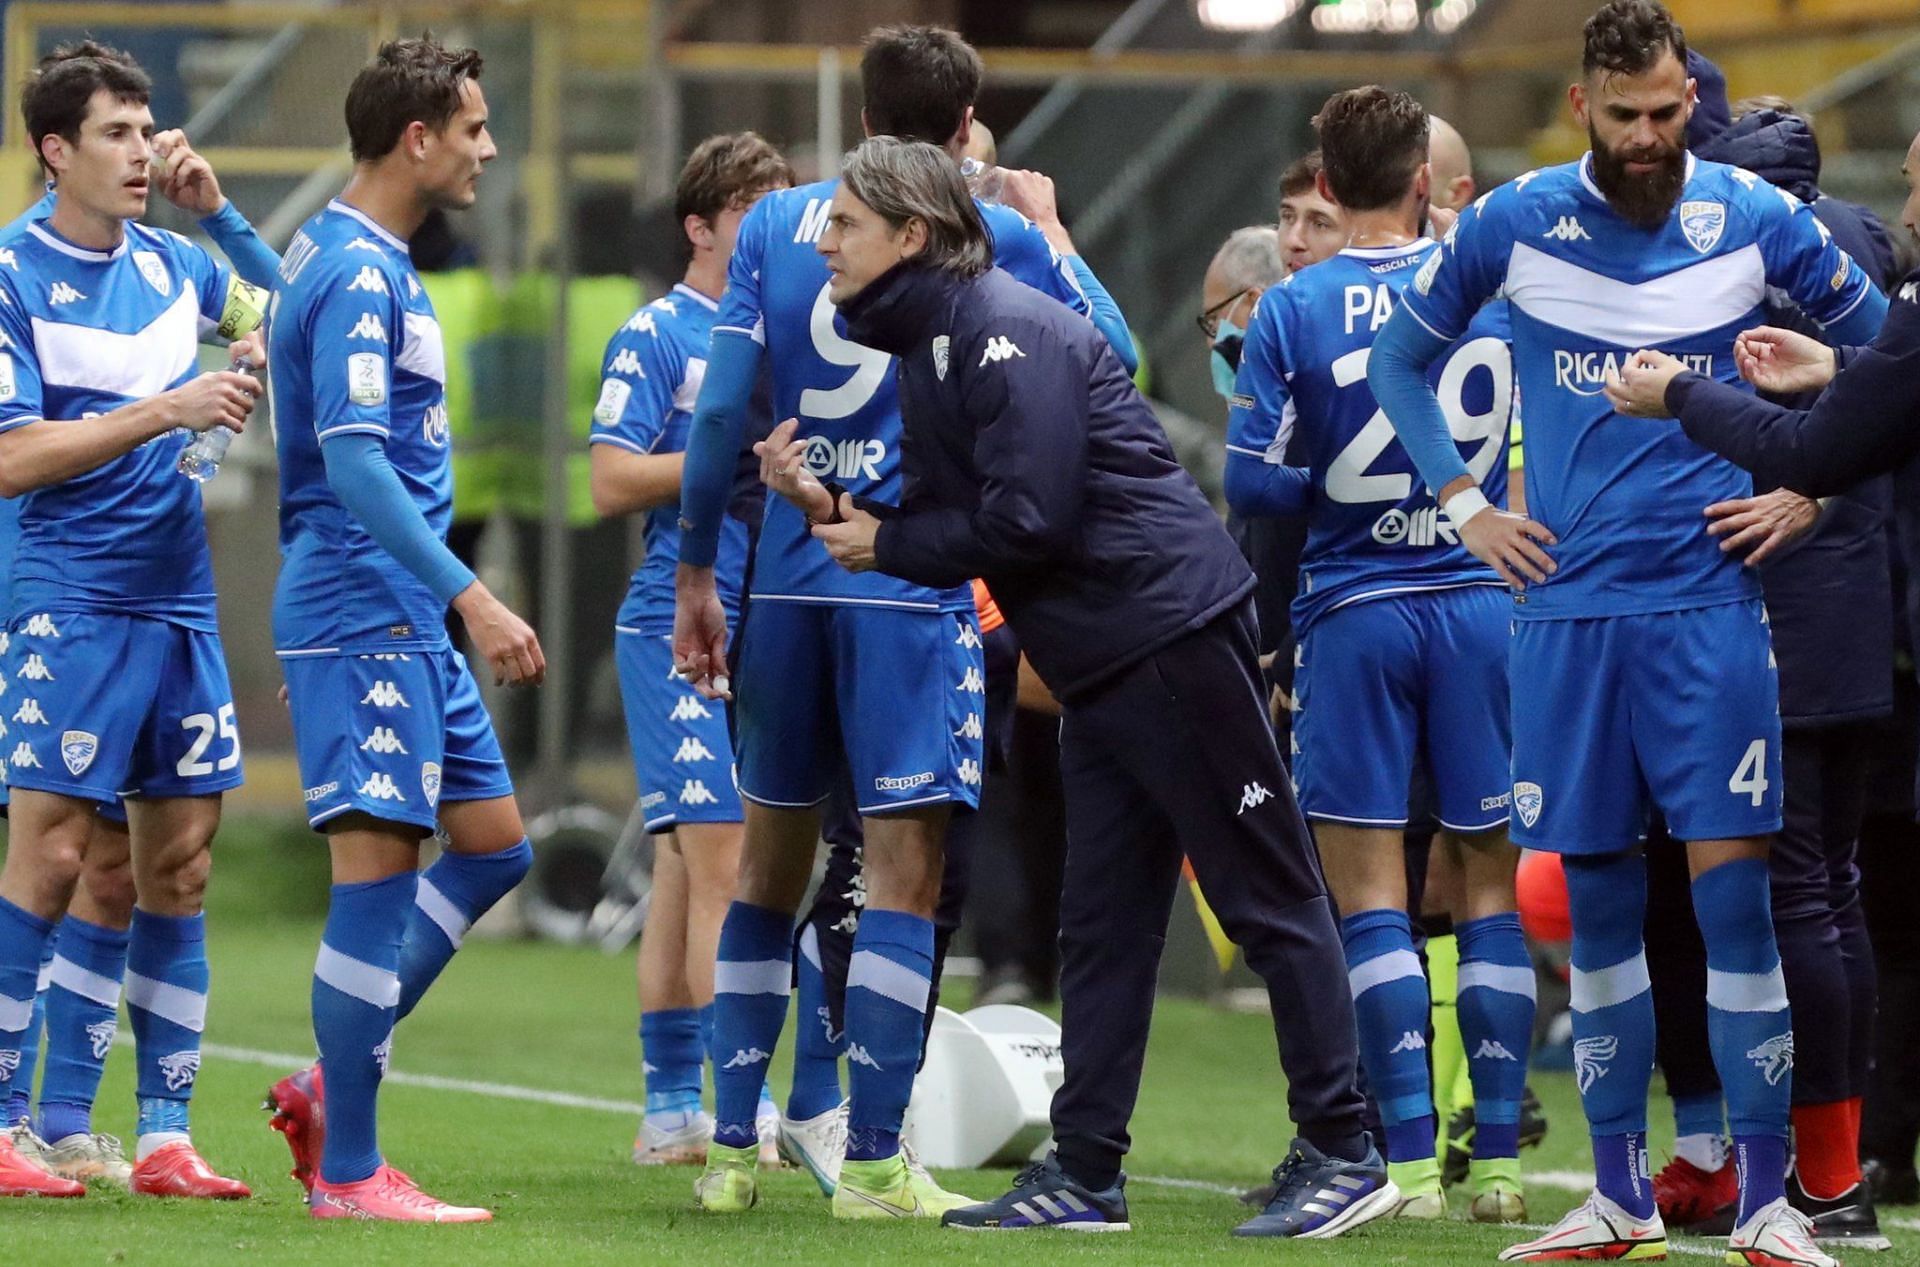 Brescia take on SPAL in their upcoming Serie B fixture on Saturday